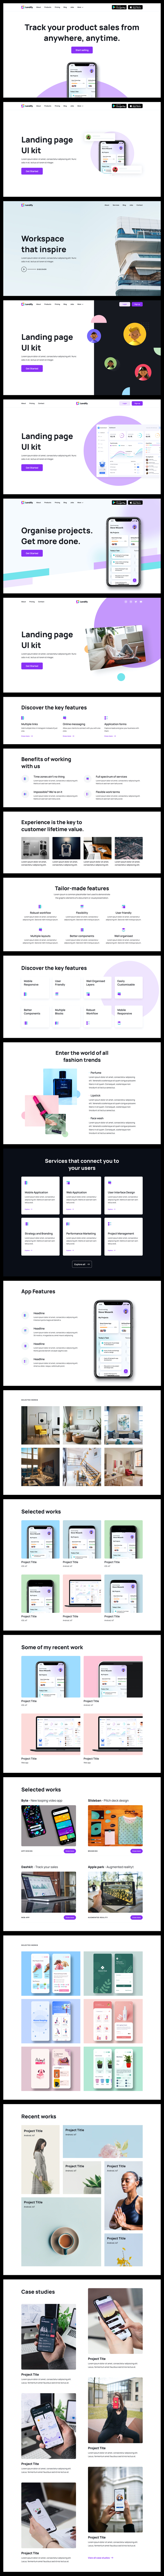 Landify - Free Landing Page UI Kit for Figma - Create your landing page design faster with Landify UI kit. The kit contains 90+ blocks, divided into 13 categories based on the purpose and use case. It is a well-organised collection of components that helps you to easily swap instance.